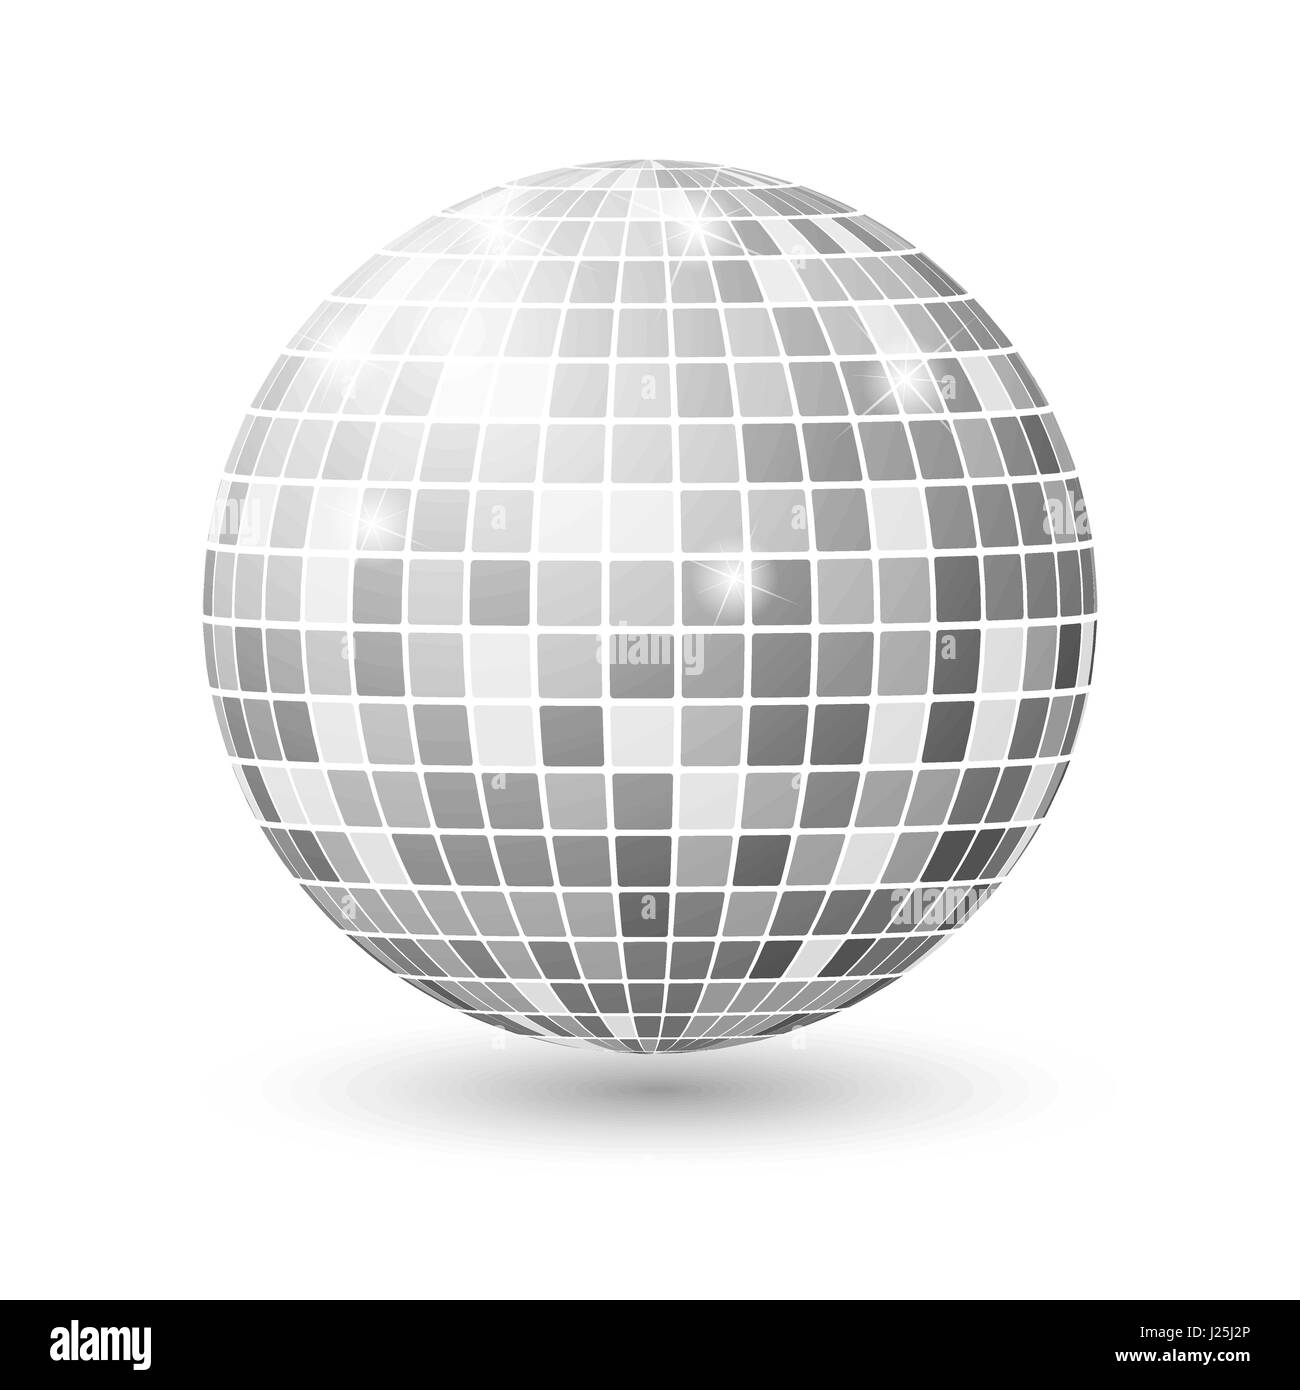 Disco ball isolated illustration. Night Club party light element. Bright mirror silver ball design for disco dance club. Stock Vector